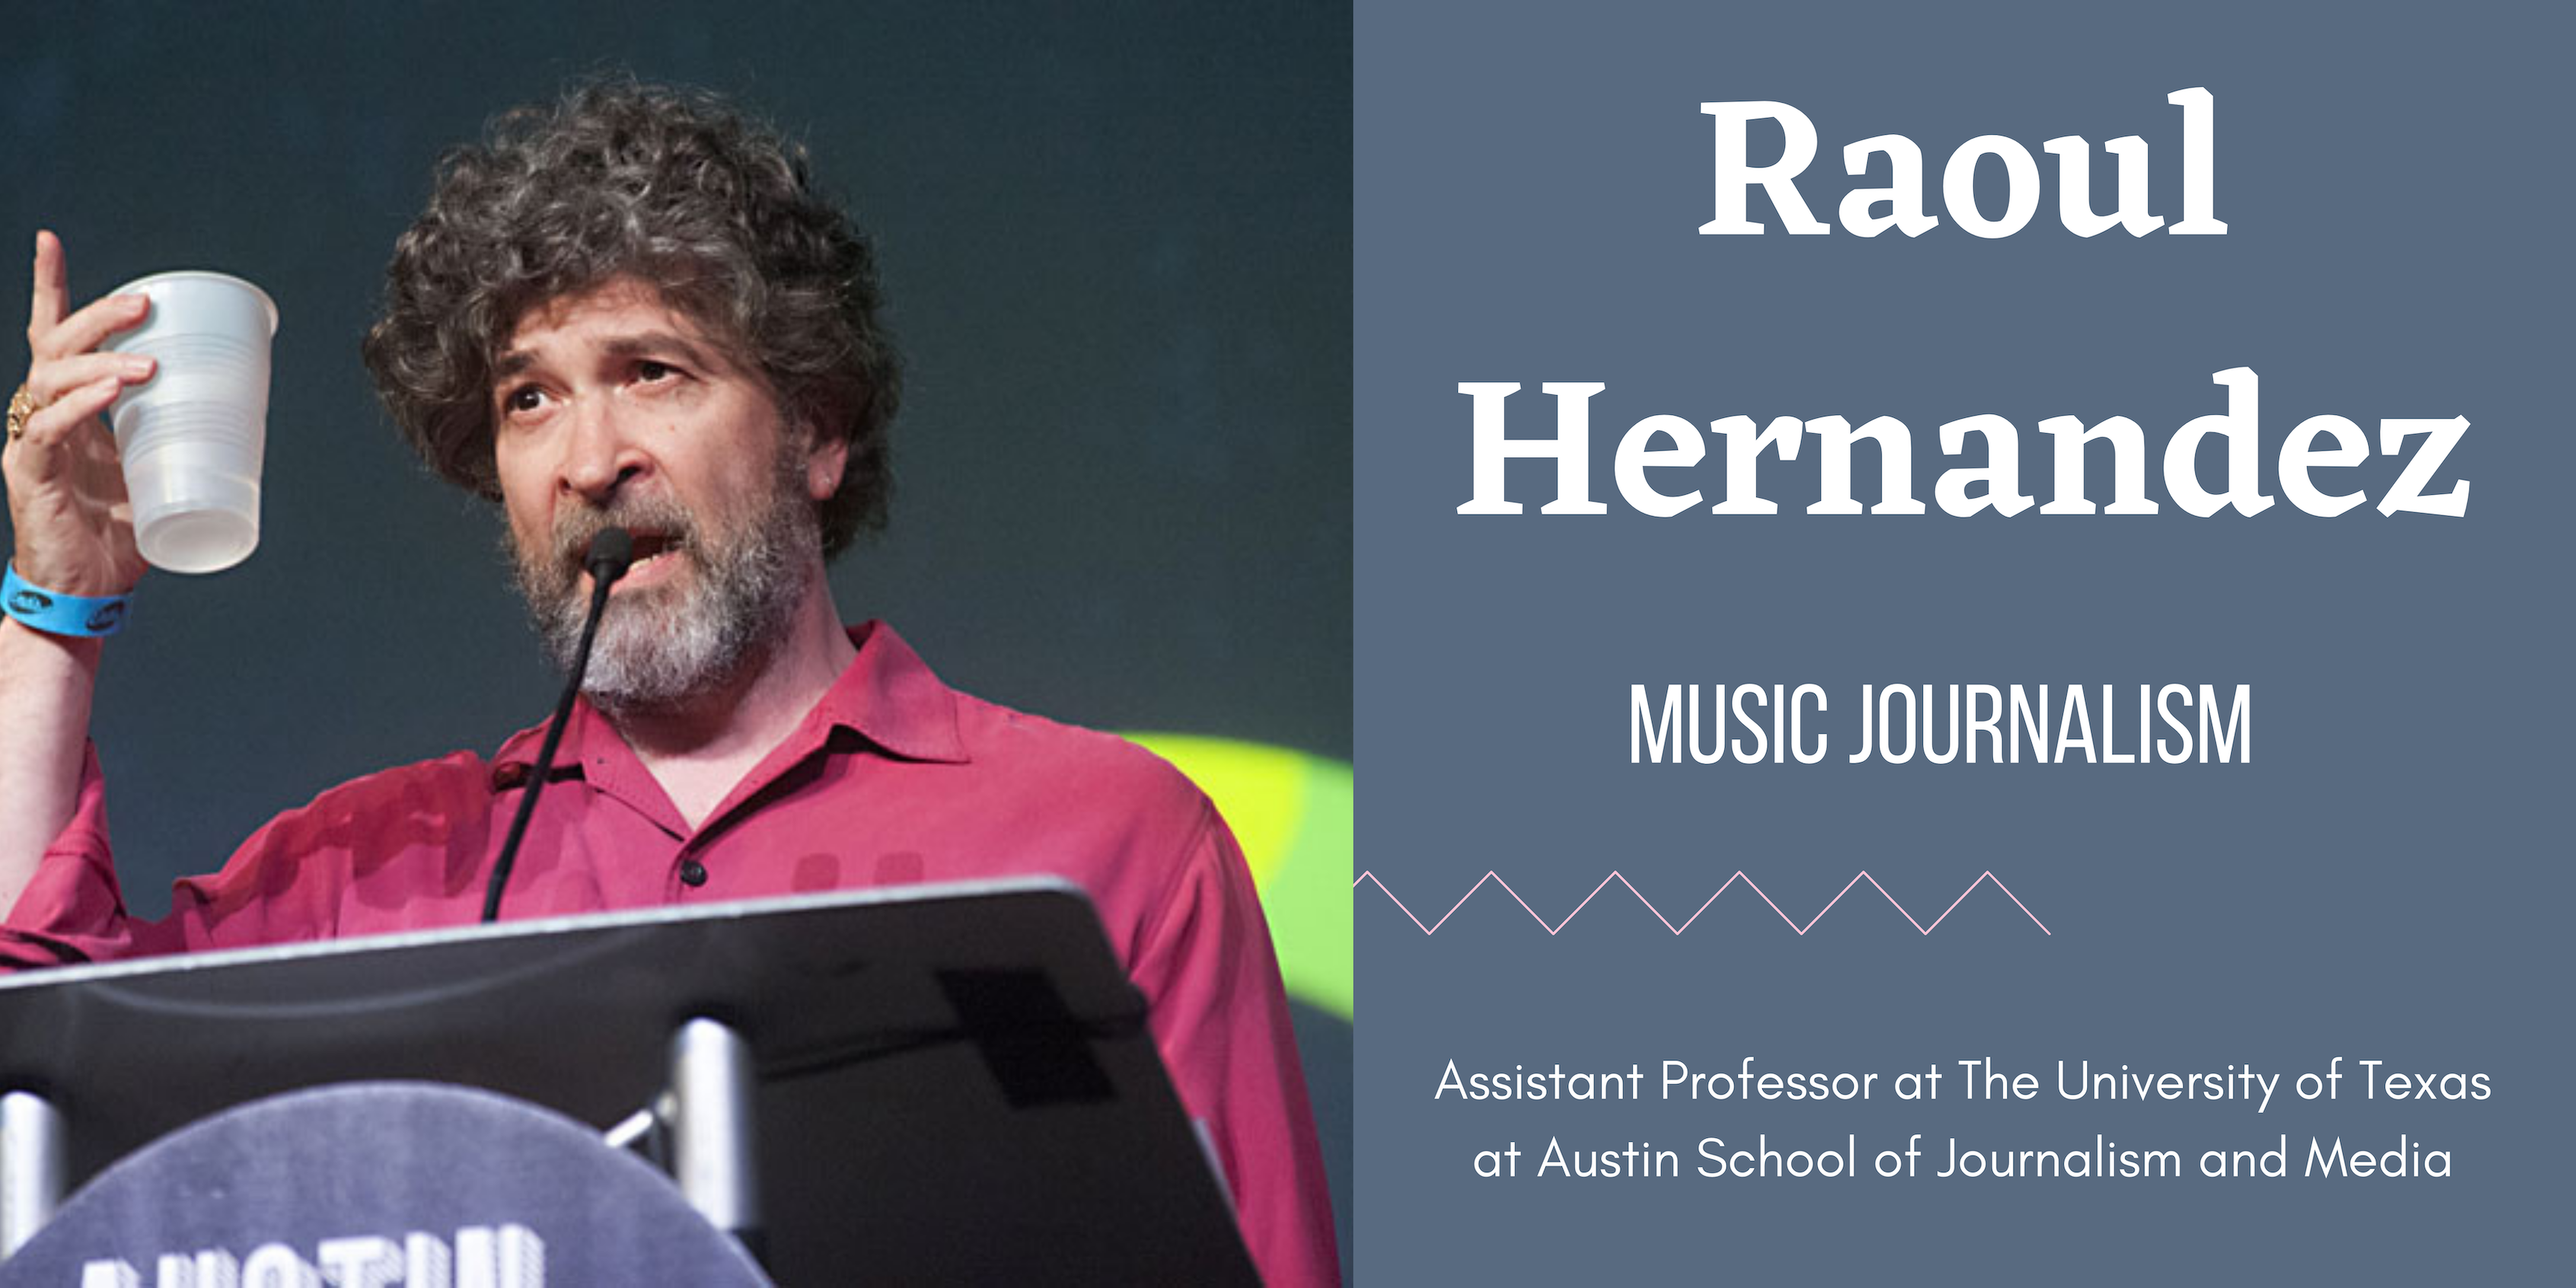 On the left is a photo of Assistant Professor Raoul Hernandez. On the right on a blue background is white text that says, "Raoul Hernandez," "Music Journalism" and his job title.